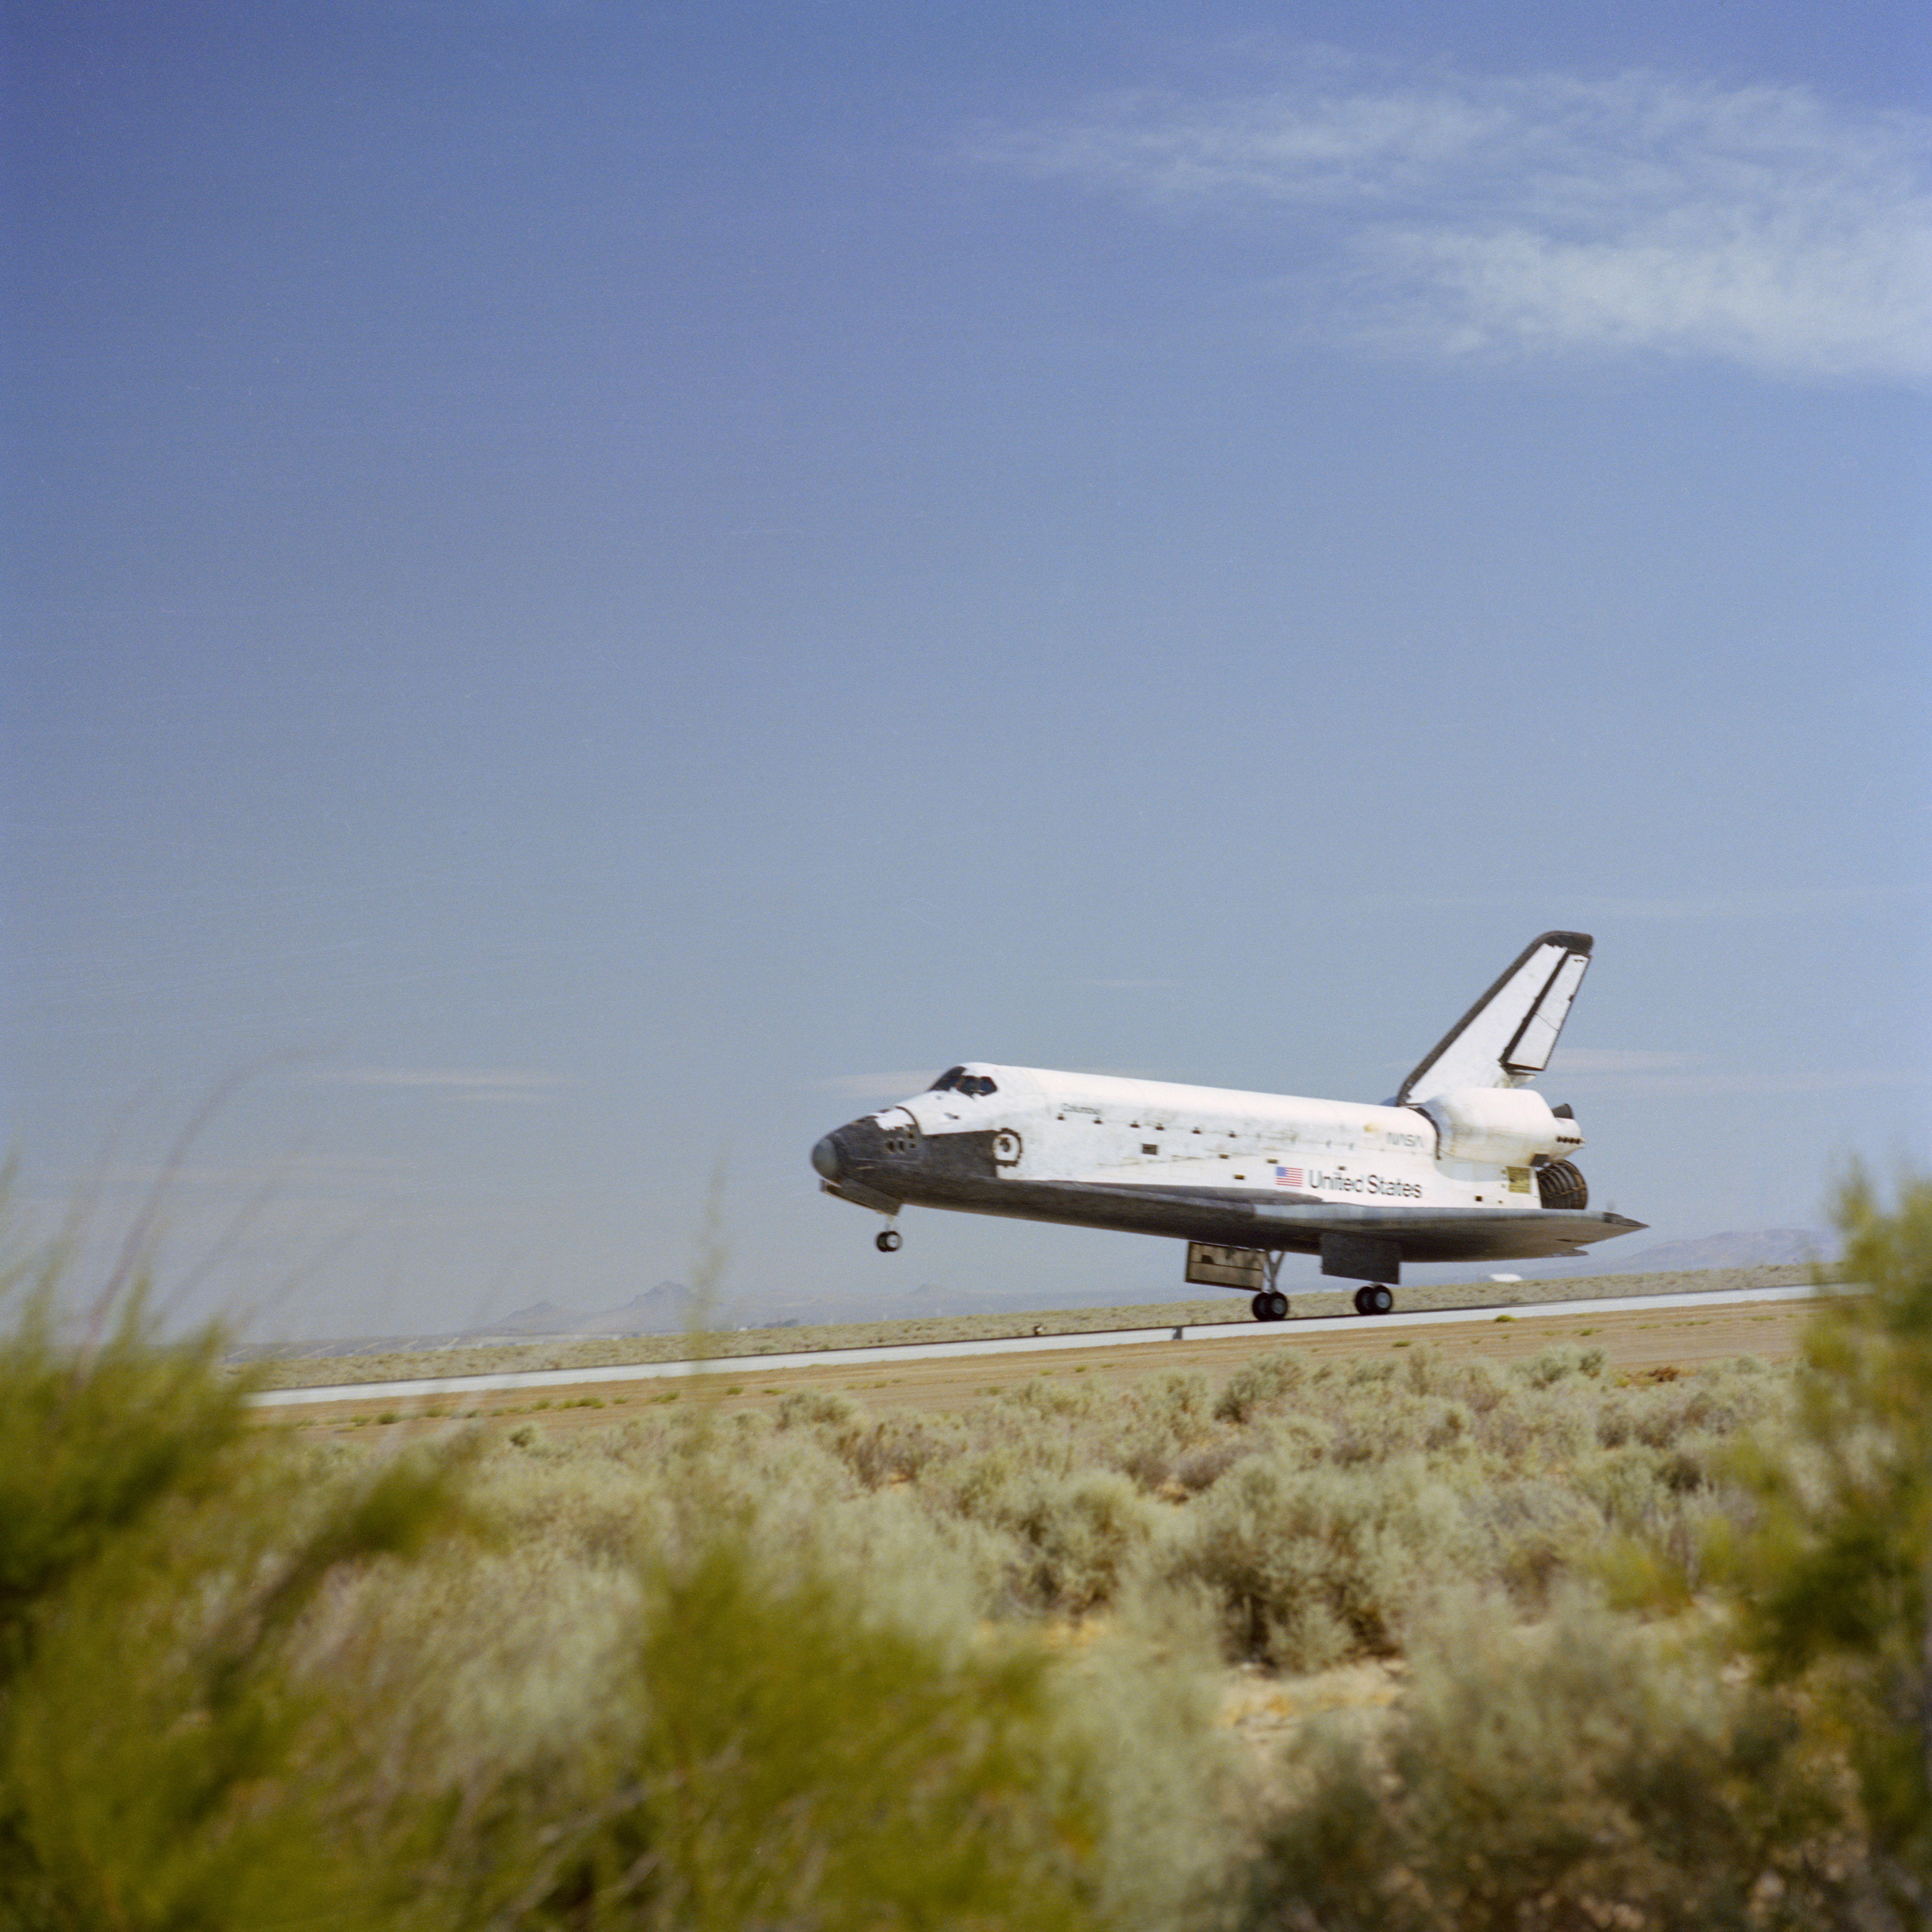 Space shuttle Columbia makes a touchdown at Edwards Air Force Base (AFB) in California to end the STS-4 mission